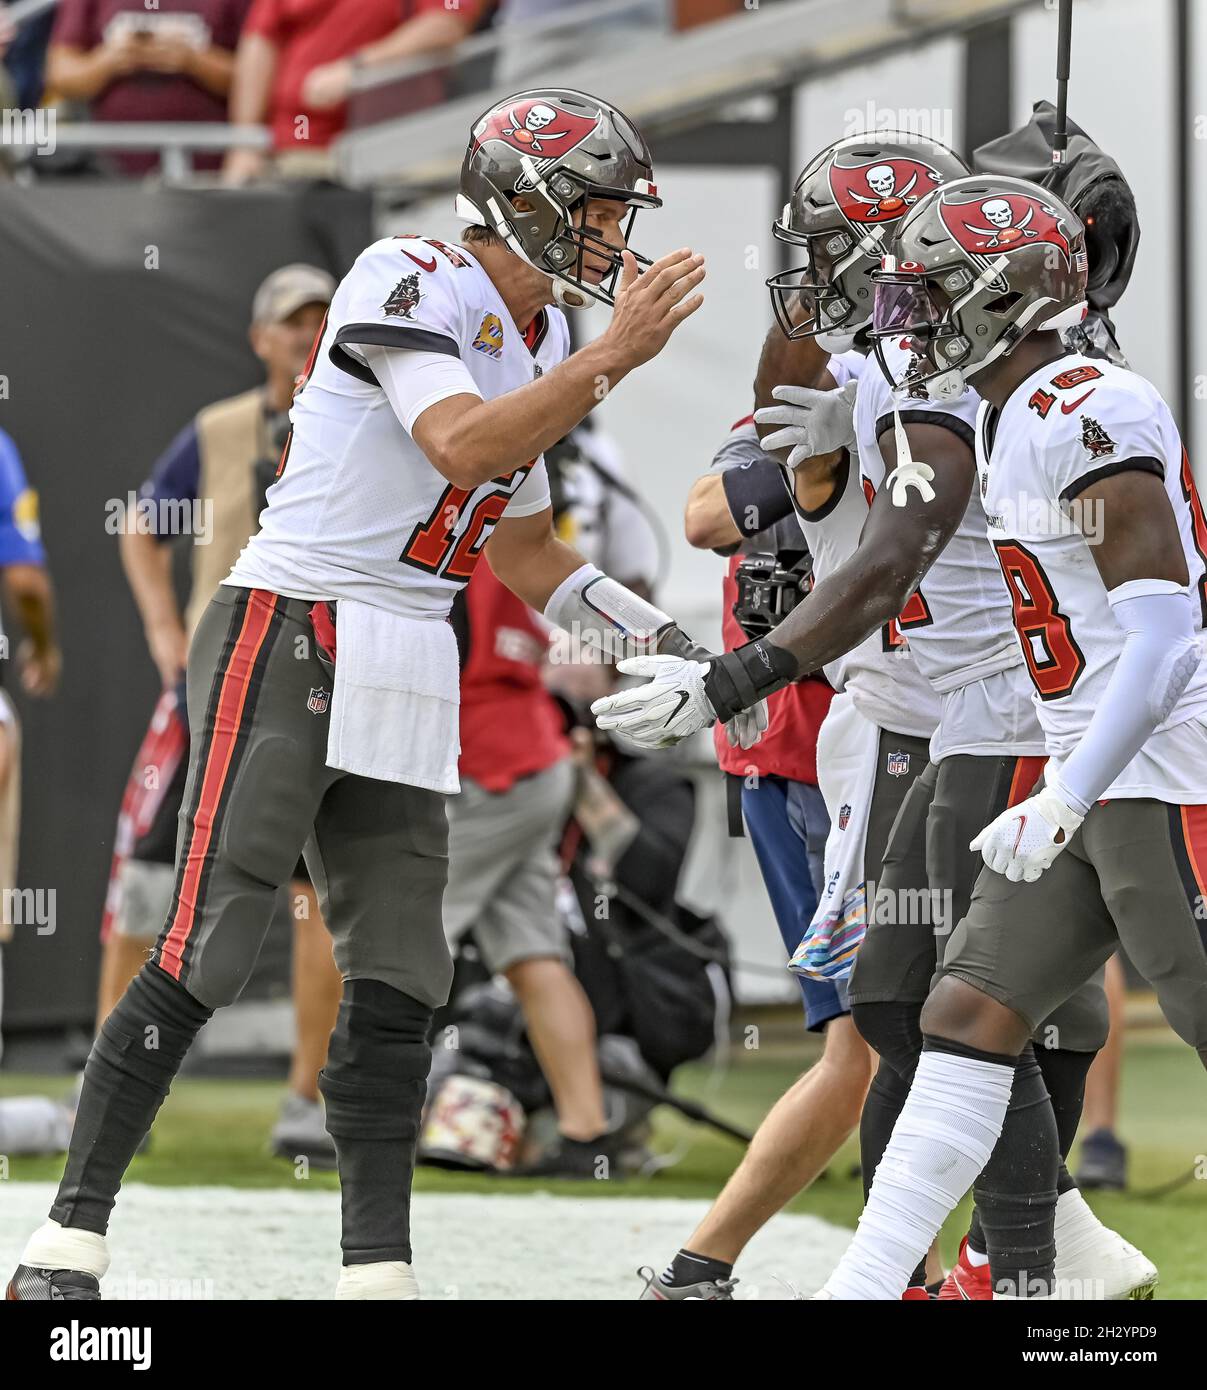 Tampa, United States. 24th Oct, 2021. Tampa Bay Buccaneers quarterback Tom Brady (12) reaches to congratulate Chris Godwin after a touchdown catch against the Chicago Bears during the first half at Raymond James Stadium in Tampa, Florida on Sunday, October 24, 2021. Photo by Steve Nesius/UPI Credit: UPI/Alamy Live News Stock Photo